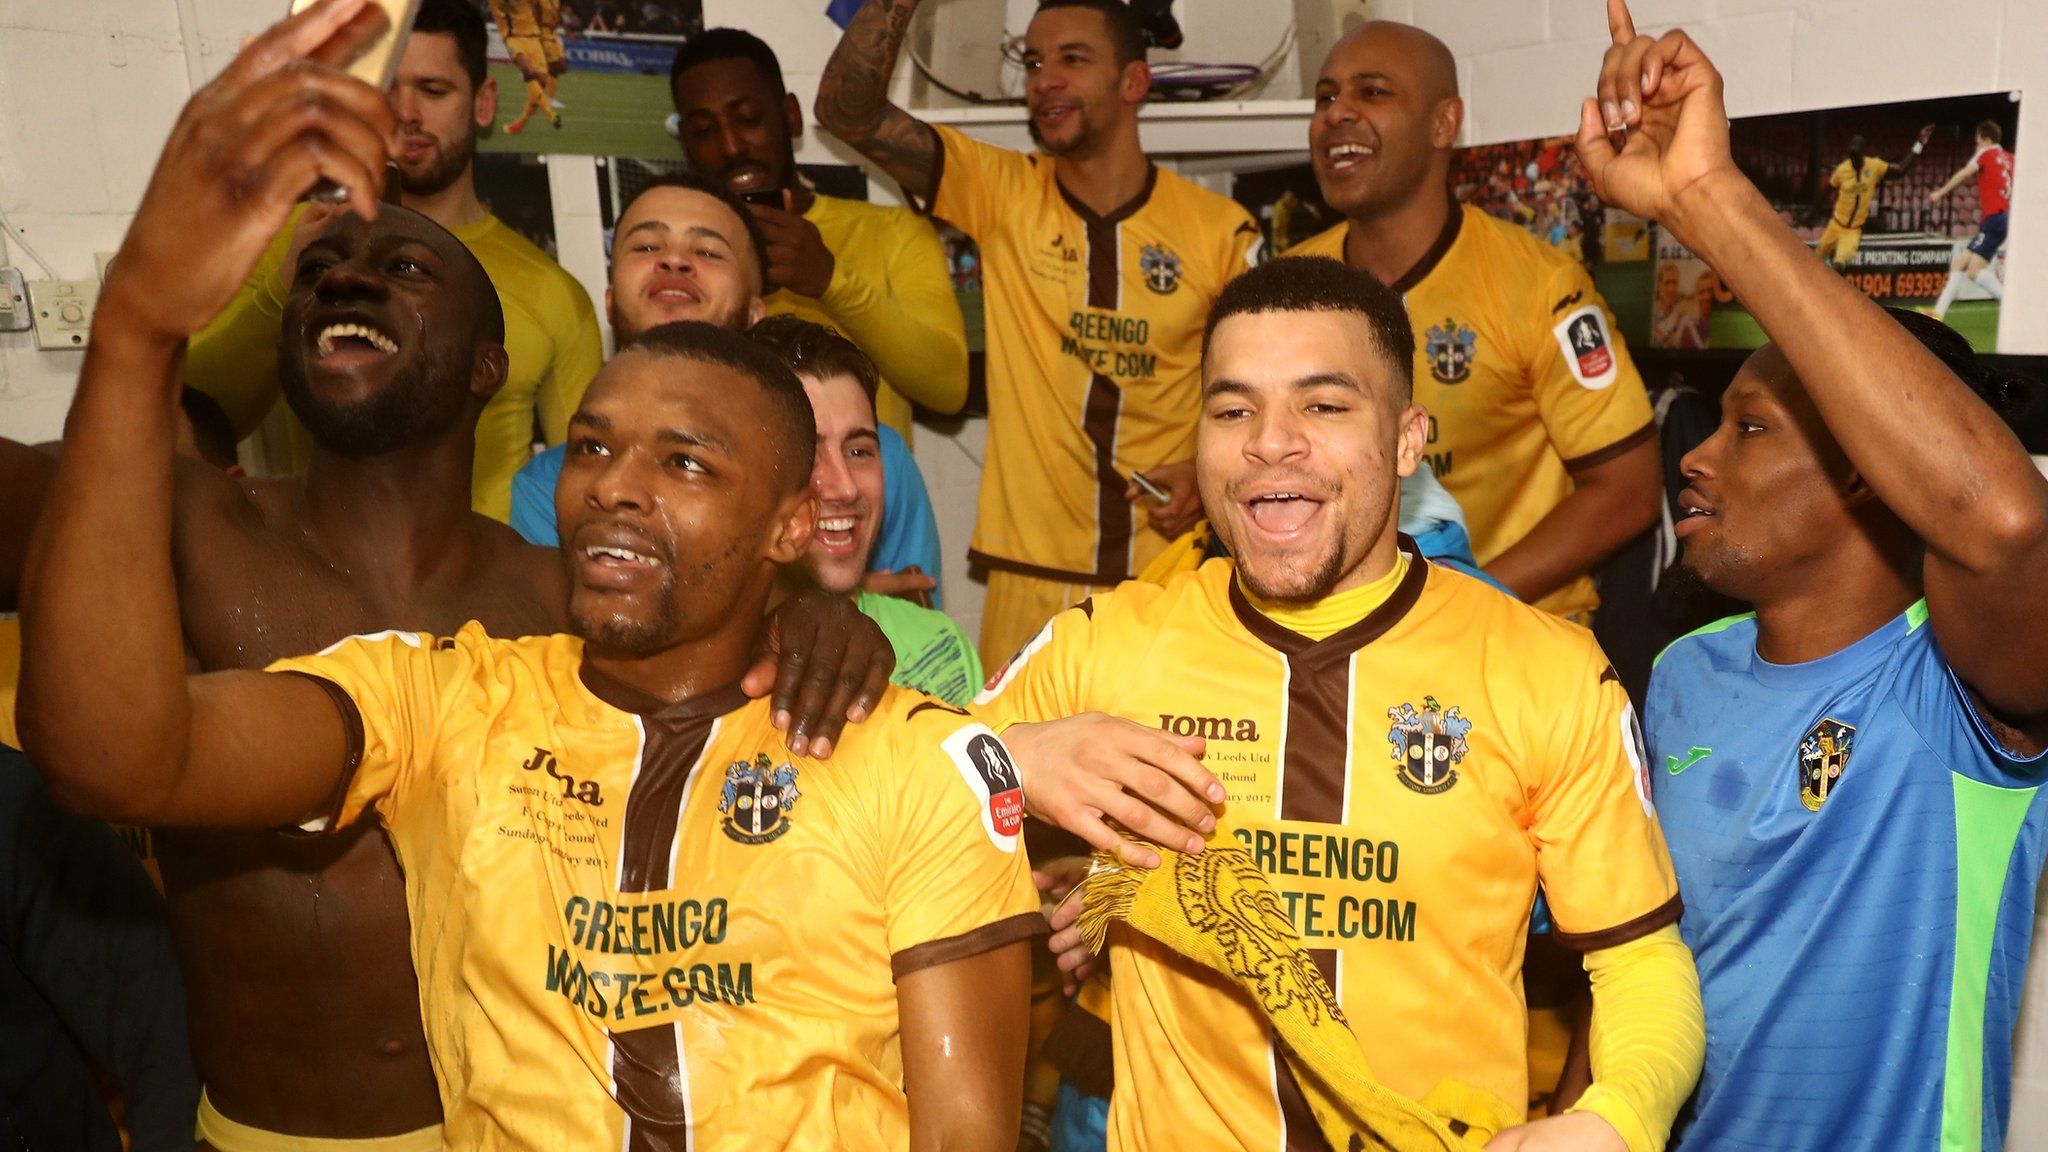 Sutton players celebrate their win in the changing room after The Emirates FA Cup Fourth Round match between Sutton United and Leeds United